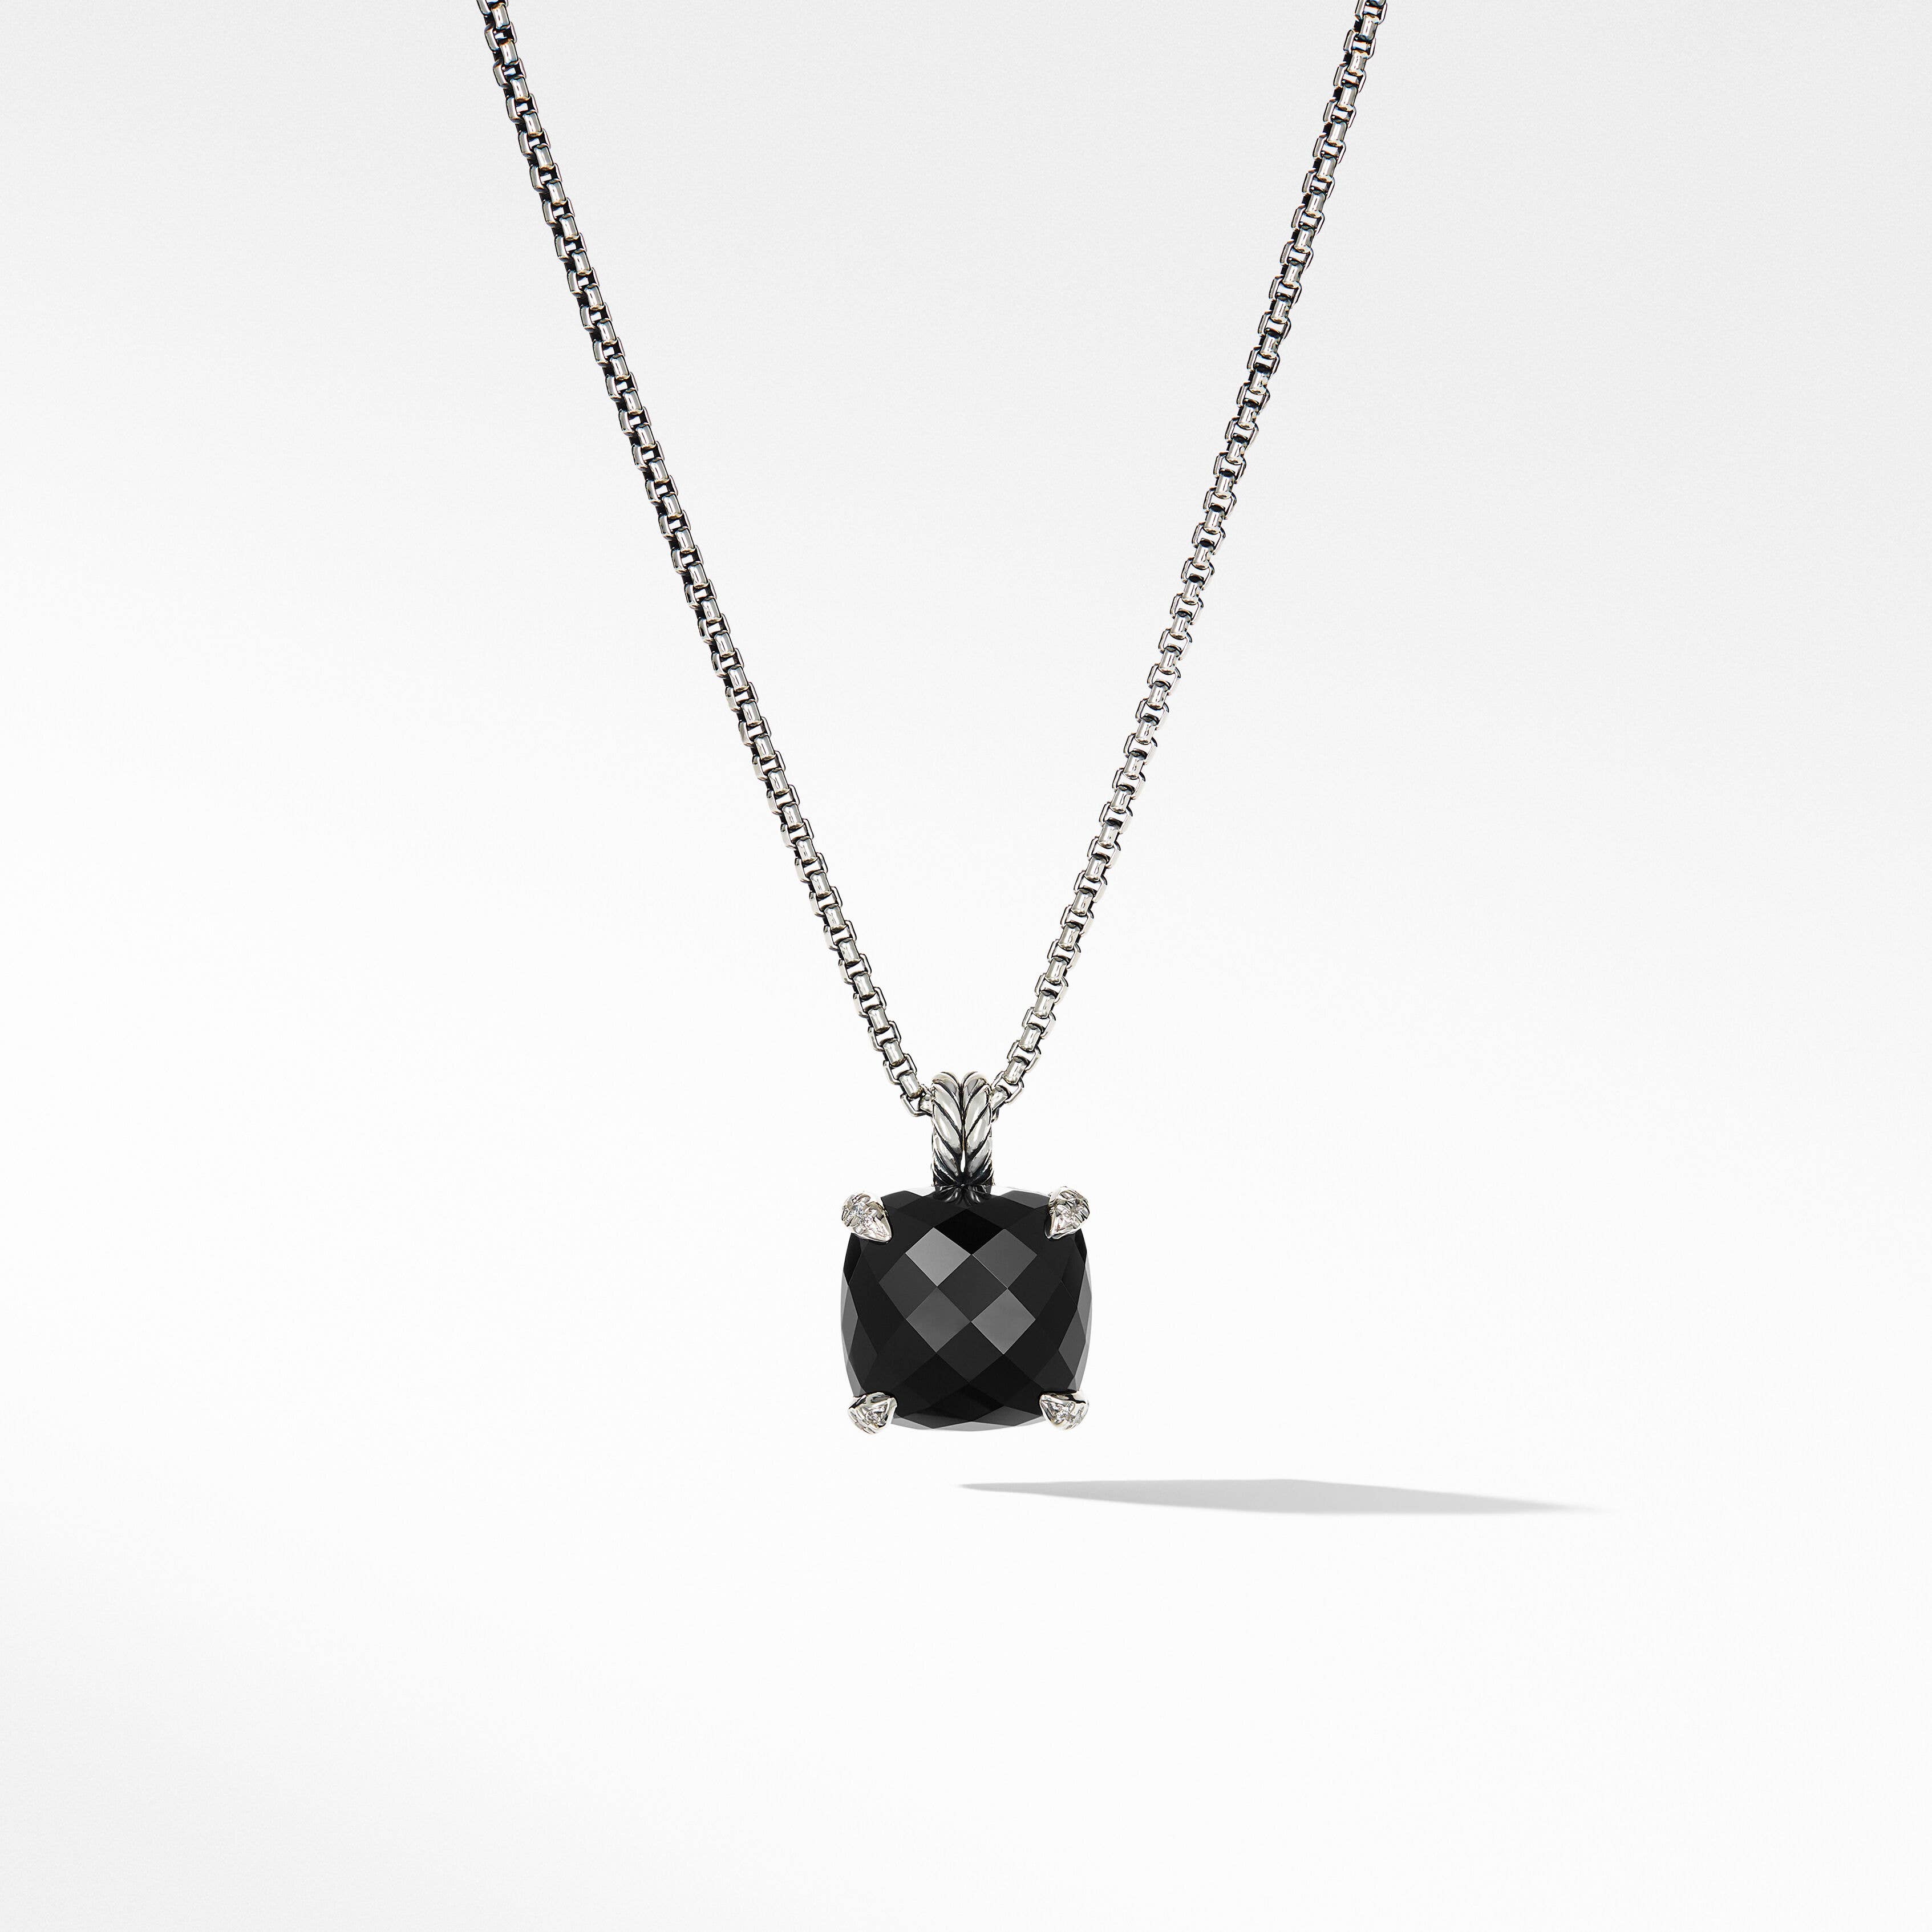 Chatelaine® Pendant Necklace in Sterling Silver with Black Onyx and Pavé Diamonds